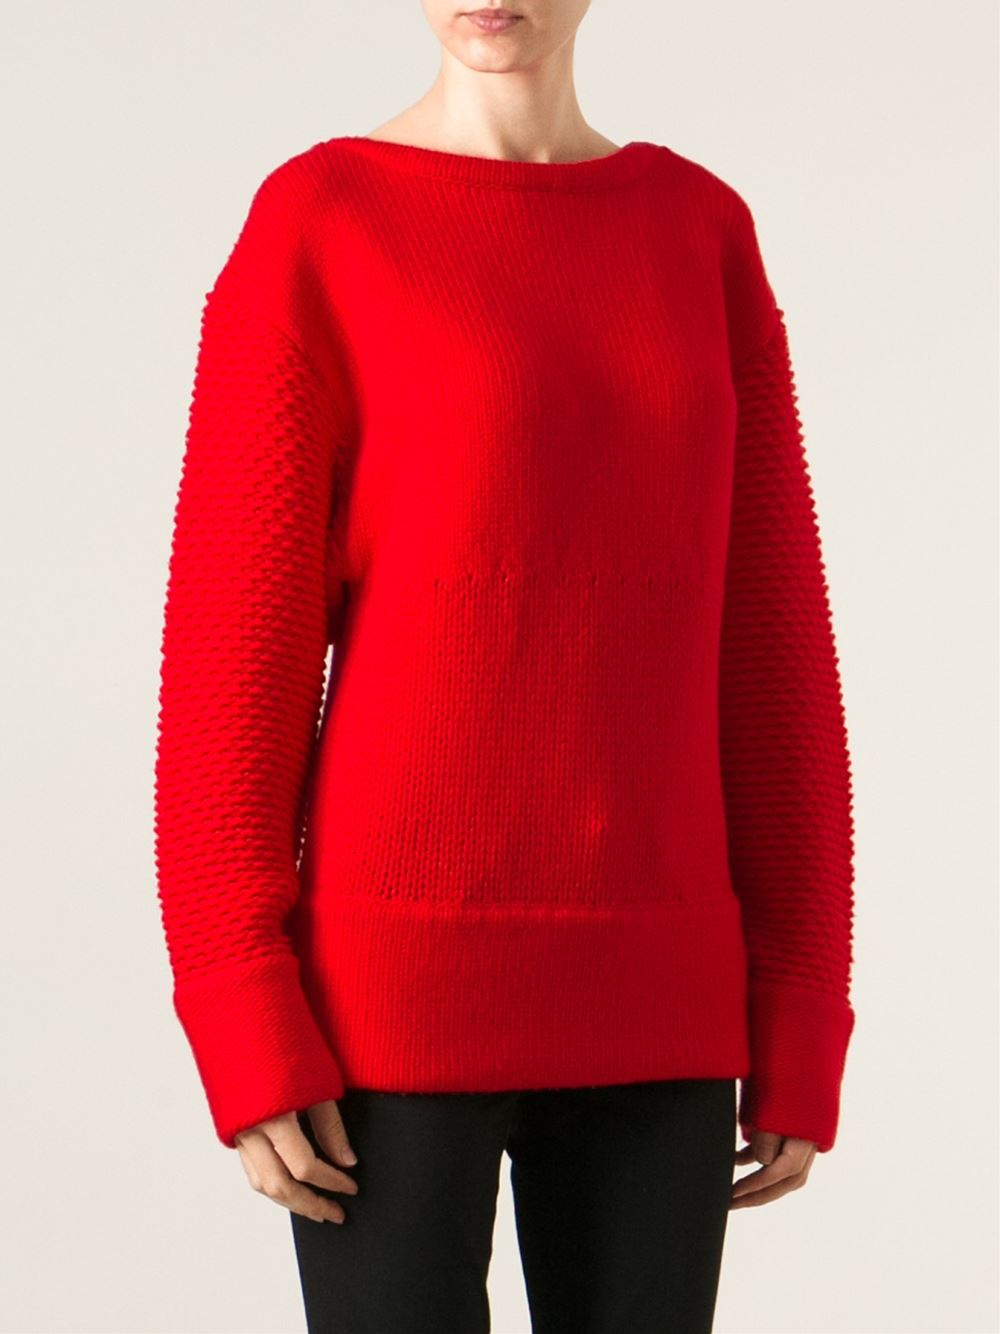 Lyst - Helmut Lang Textured Oversized Sweater in Red